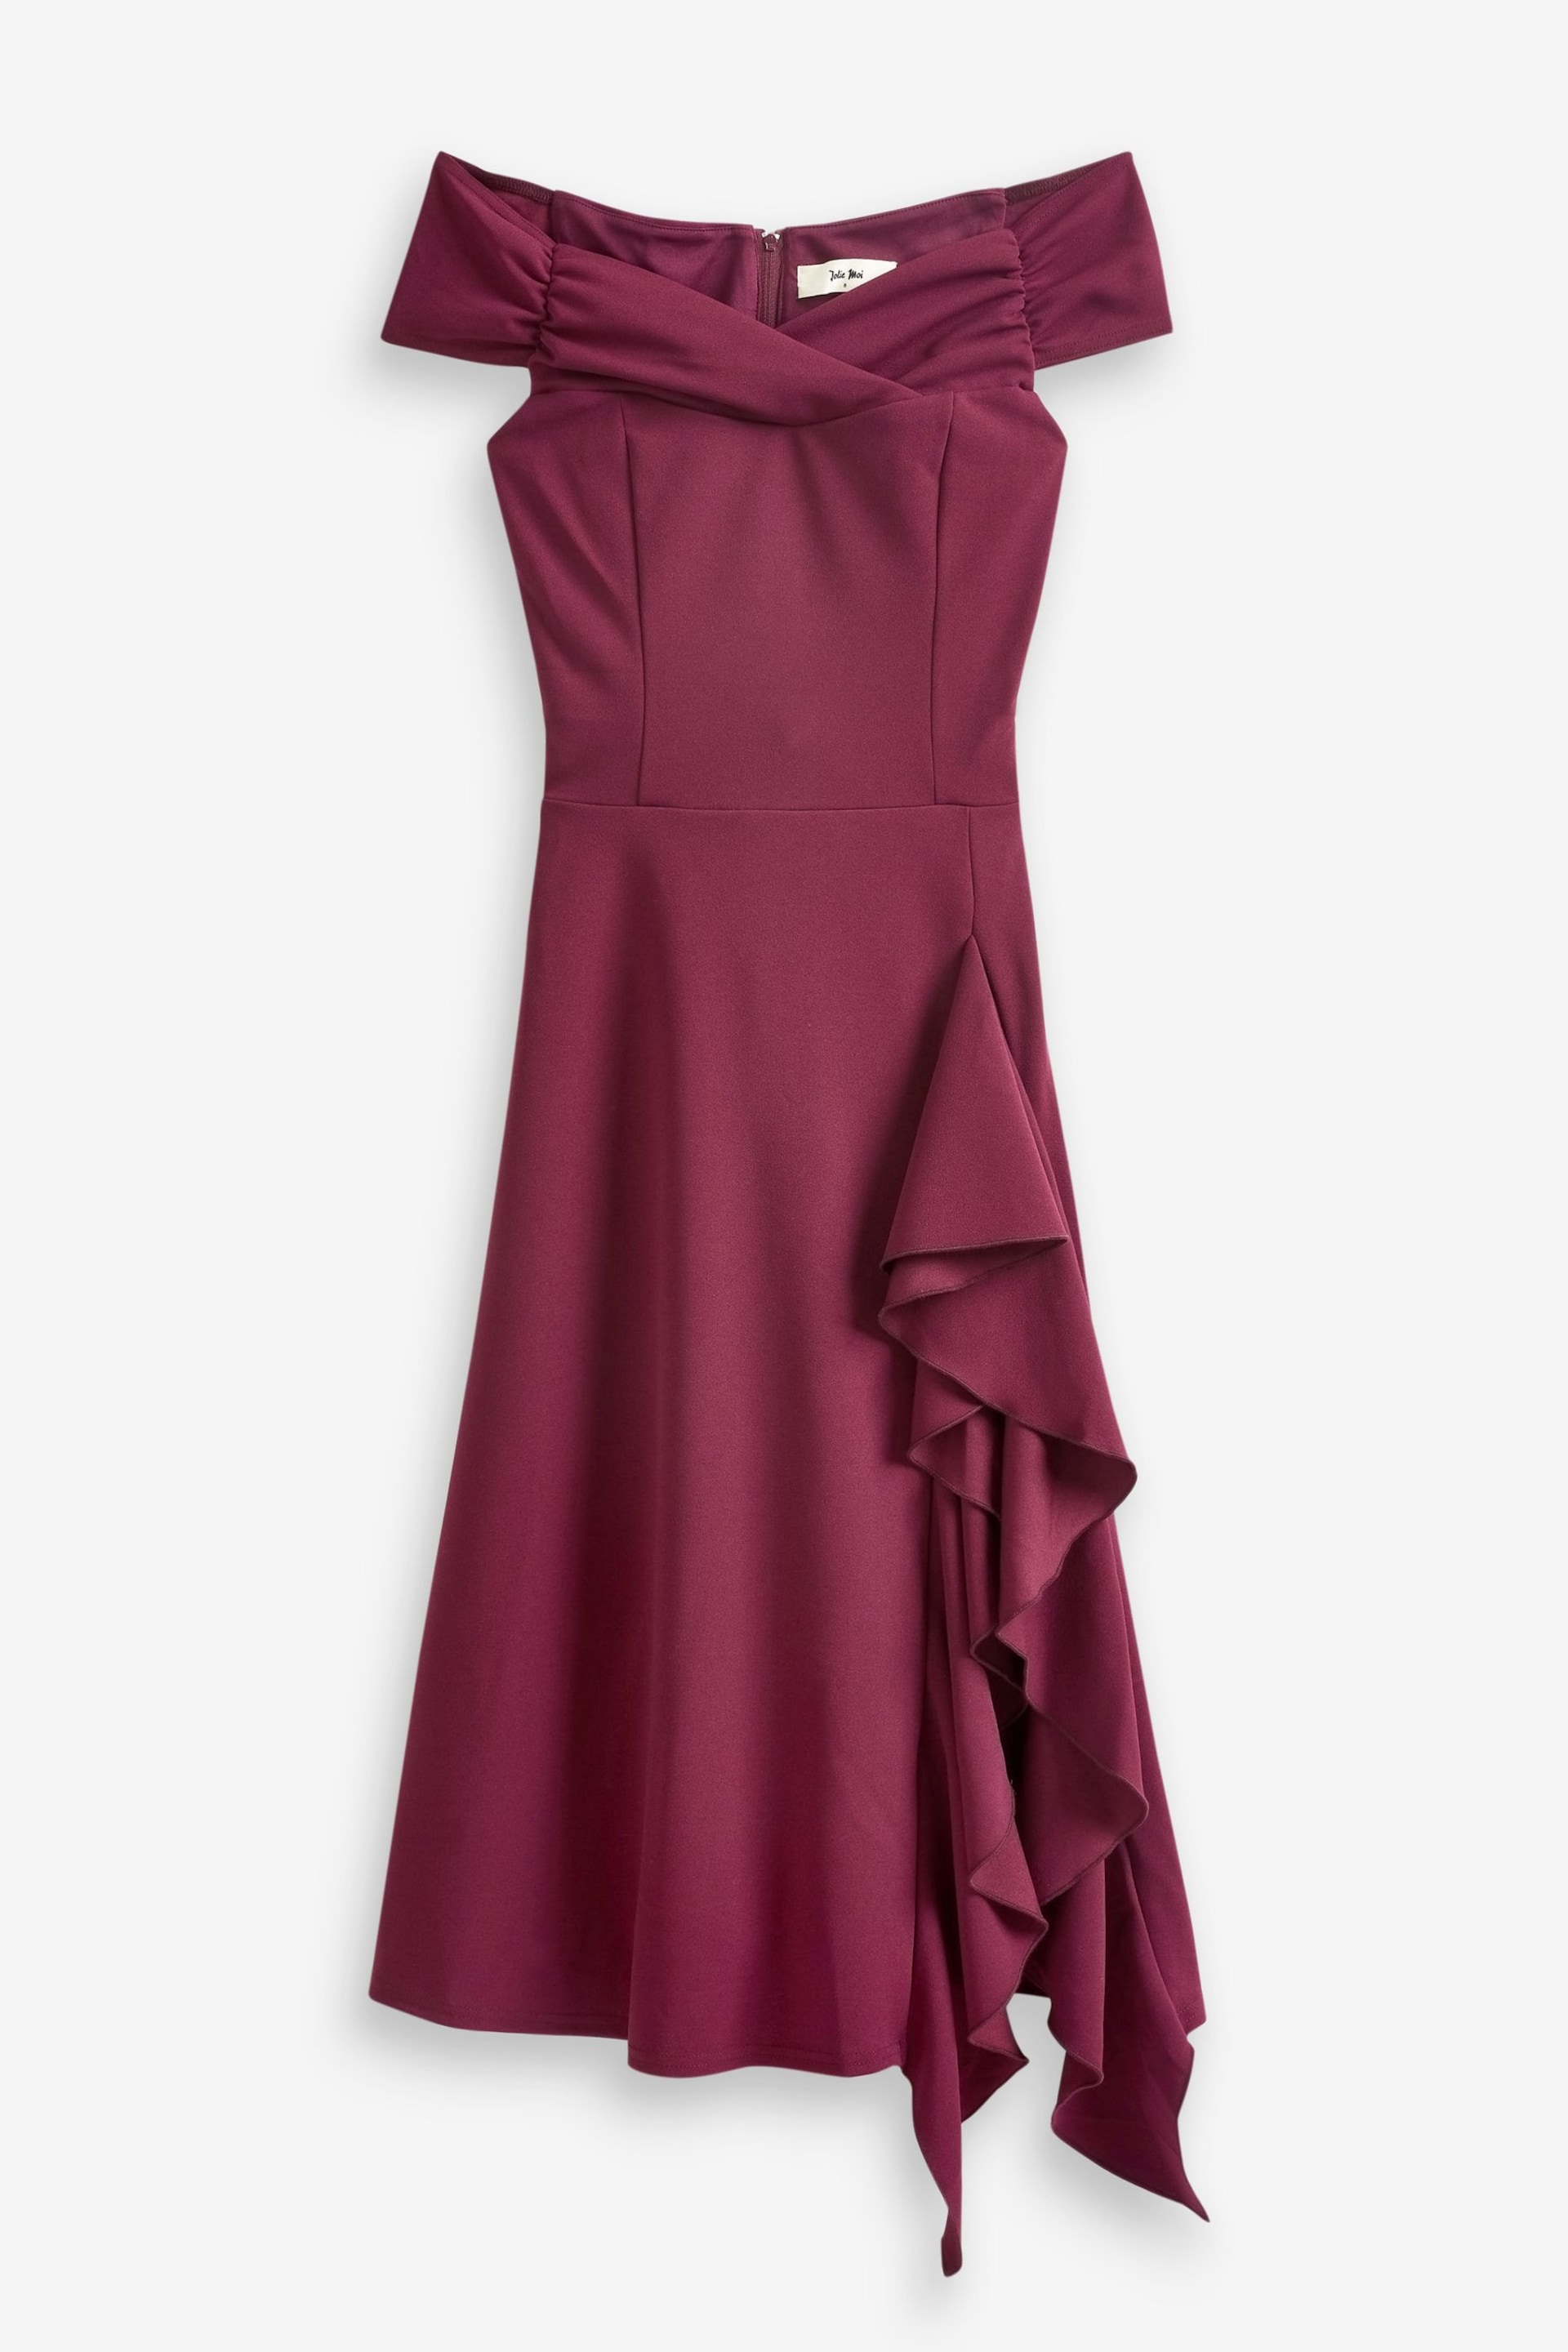 Jolie Moi Red Desiree Frill Fit & Flare Dress - Image 6 of 6